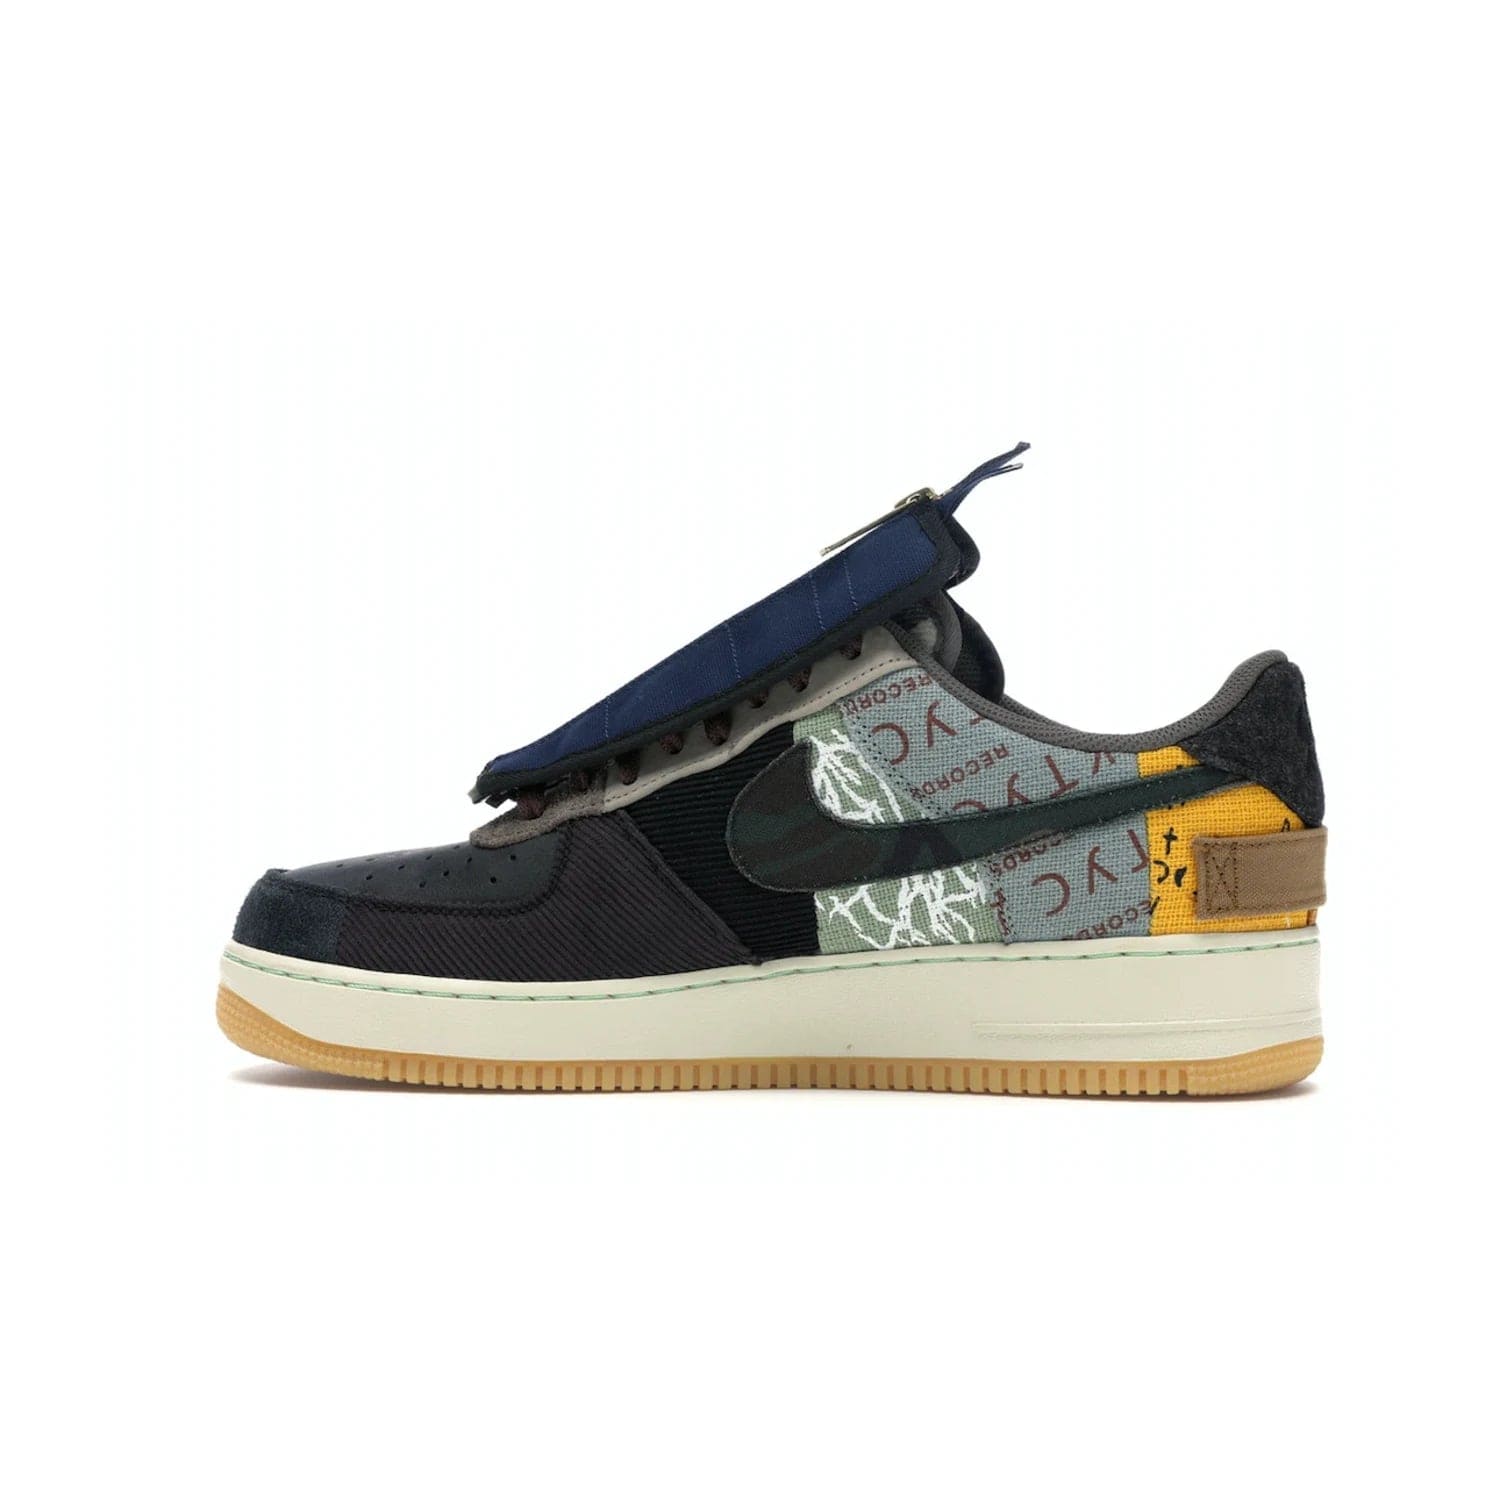 Nike Air Force 1 Low Travis Scott Cactus Jack - Image 20 - Only at www.BallersClubKickz.com - The Nike Air Force 1 Low Travis Scott Cactus Jack features a unique, multi-colored patchwork upper with muted bronze and fossil accents. Includes detachable lace cover, brass zipper, and Cactus Jack insignias. A sail midsole, gum rubber outsole complete the eye-catching design. Perfect for comfort and style with unexpected touches of detail.